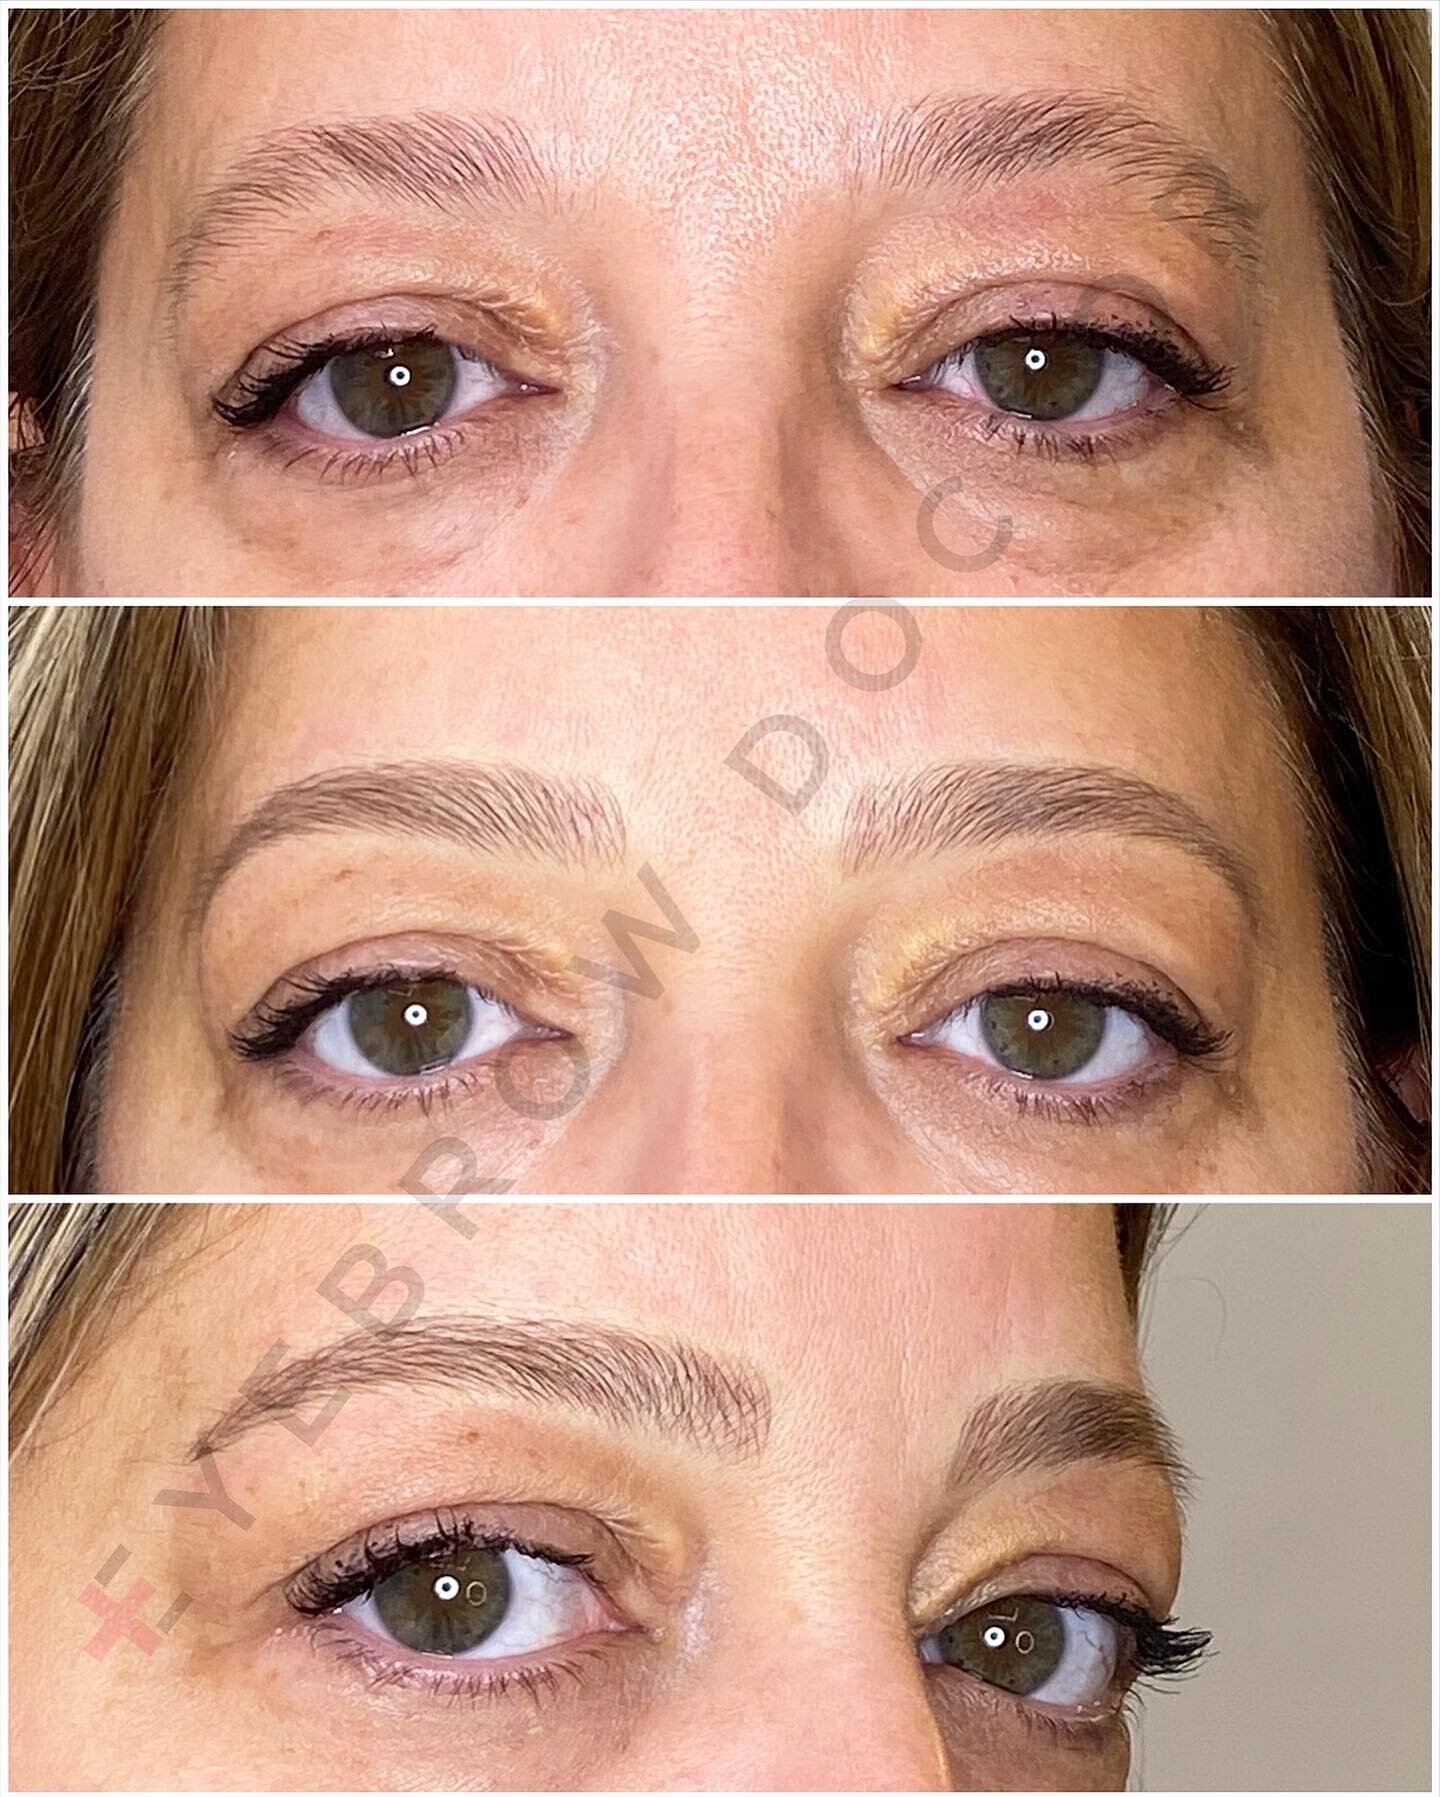 Fresh brows.Swipe for more.To book visit EyebrowDoctor.com